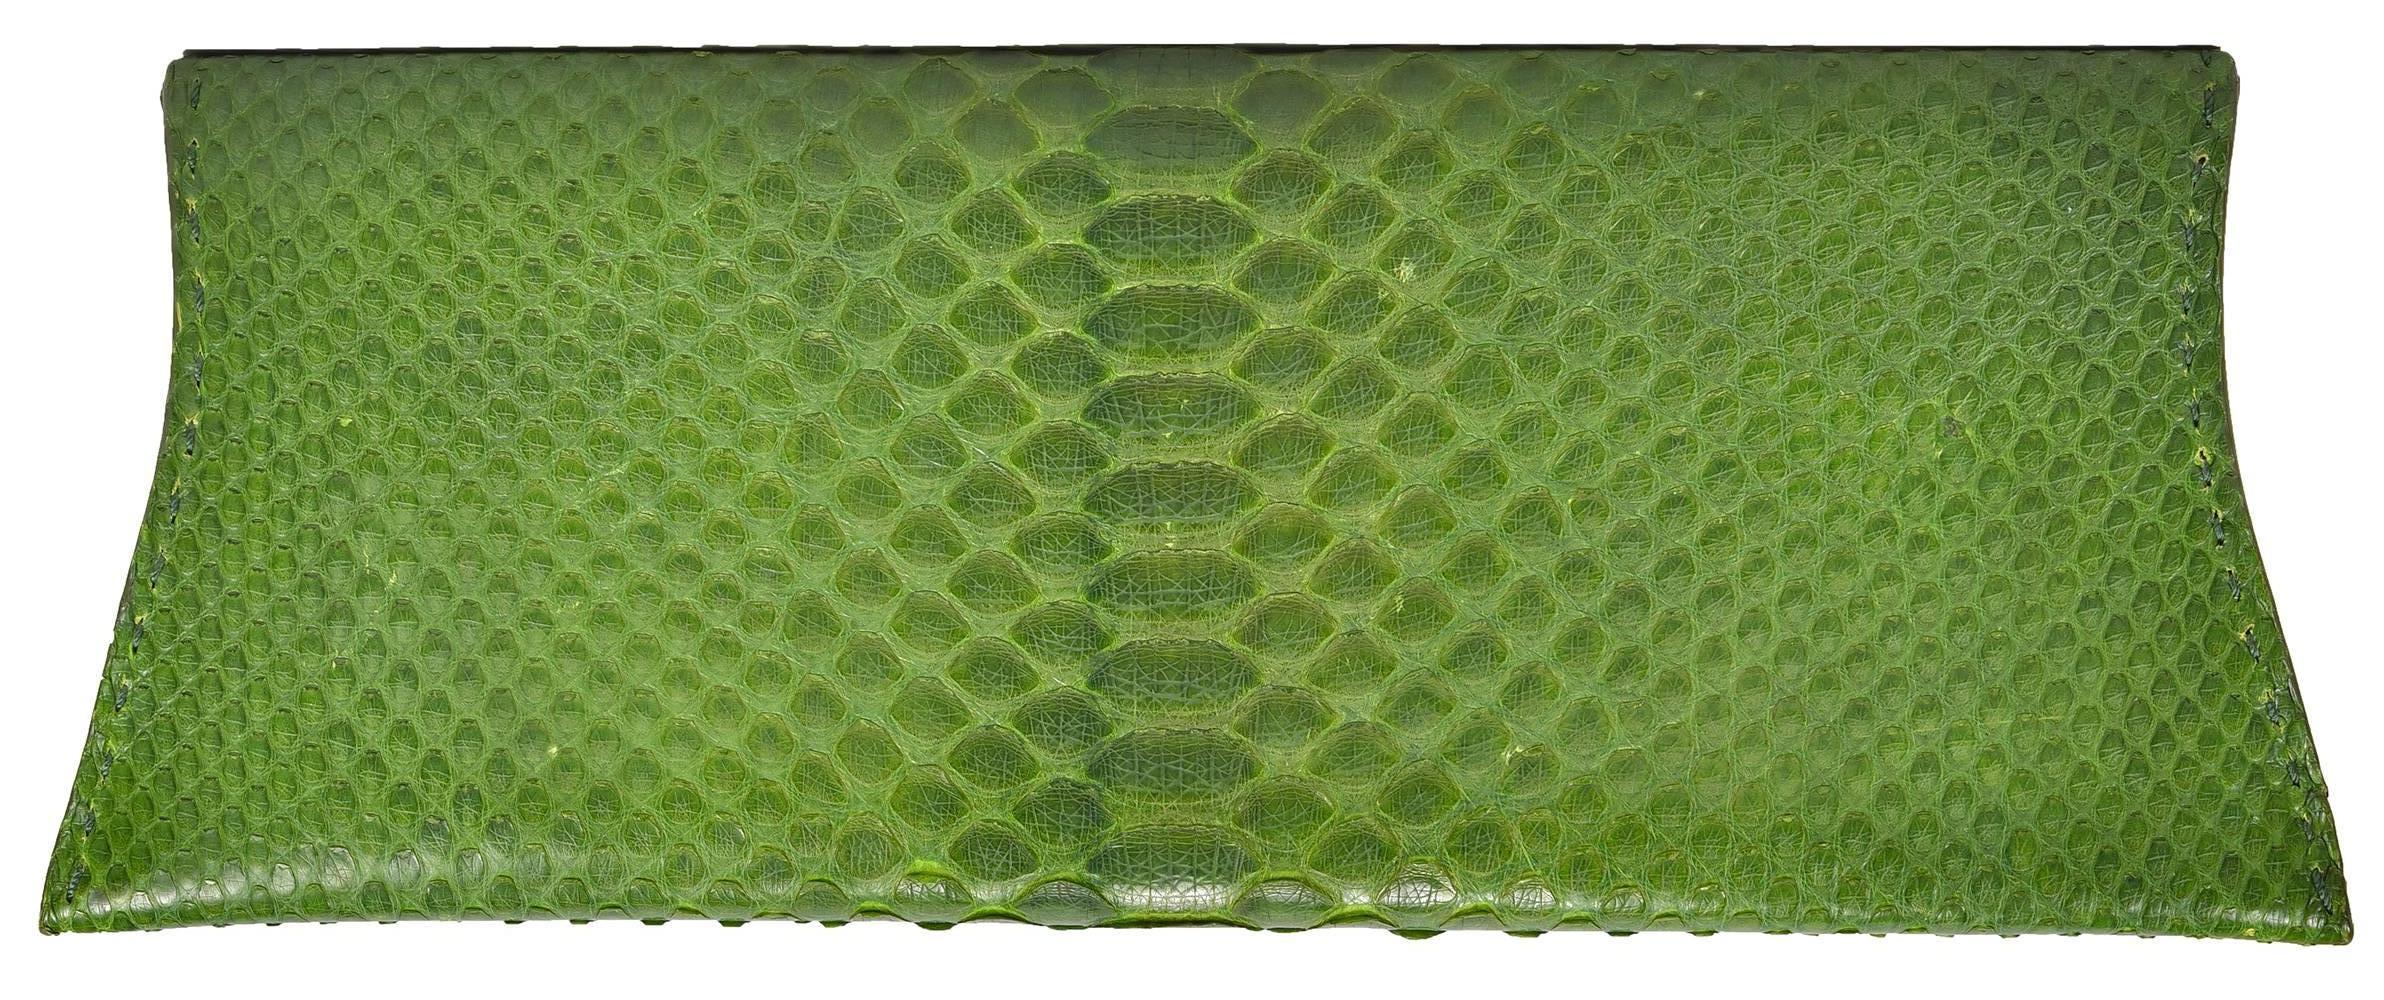 Perfect color for Spring or all year round! Green python VBH clutch bag in pristine condition.